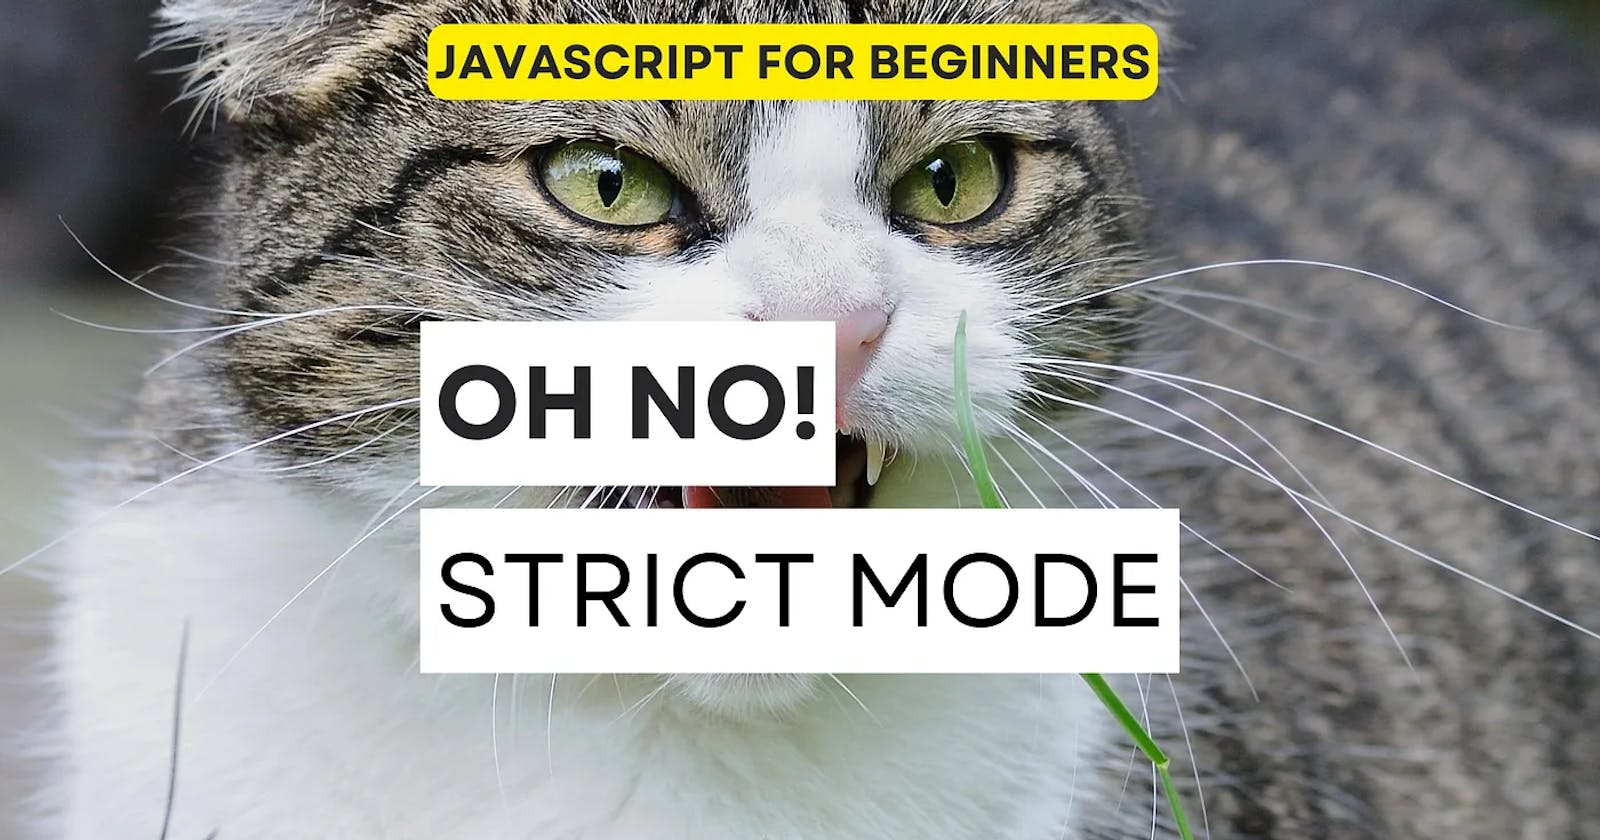 What is Strict Mode in JavaScript?